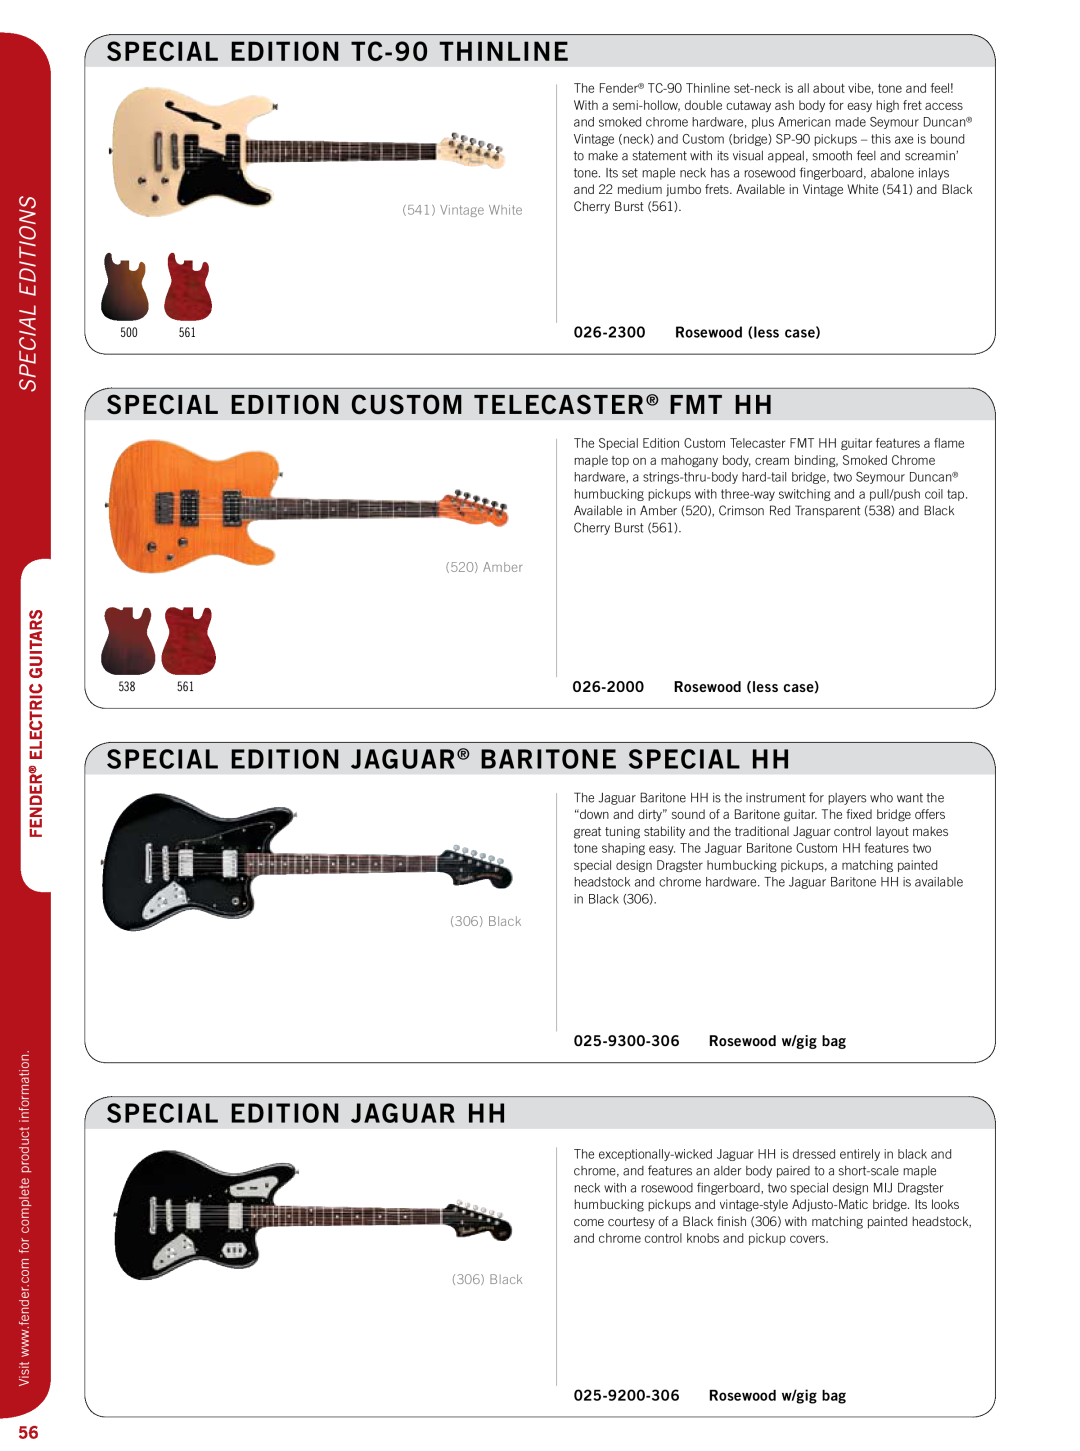 Fender 011-7602 special edition TC-90 THINLINE, special edition CUSTOM TELECASTER FMT HH, special edition jaguar hh, Amber 